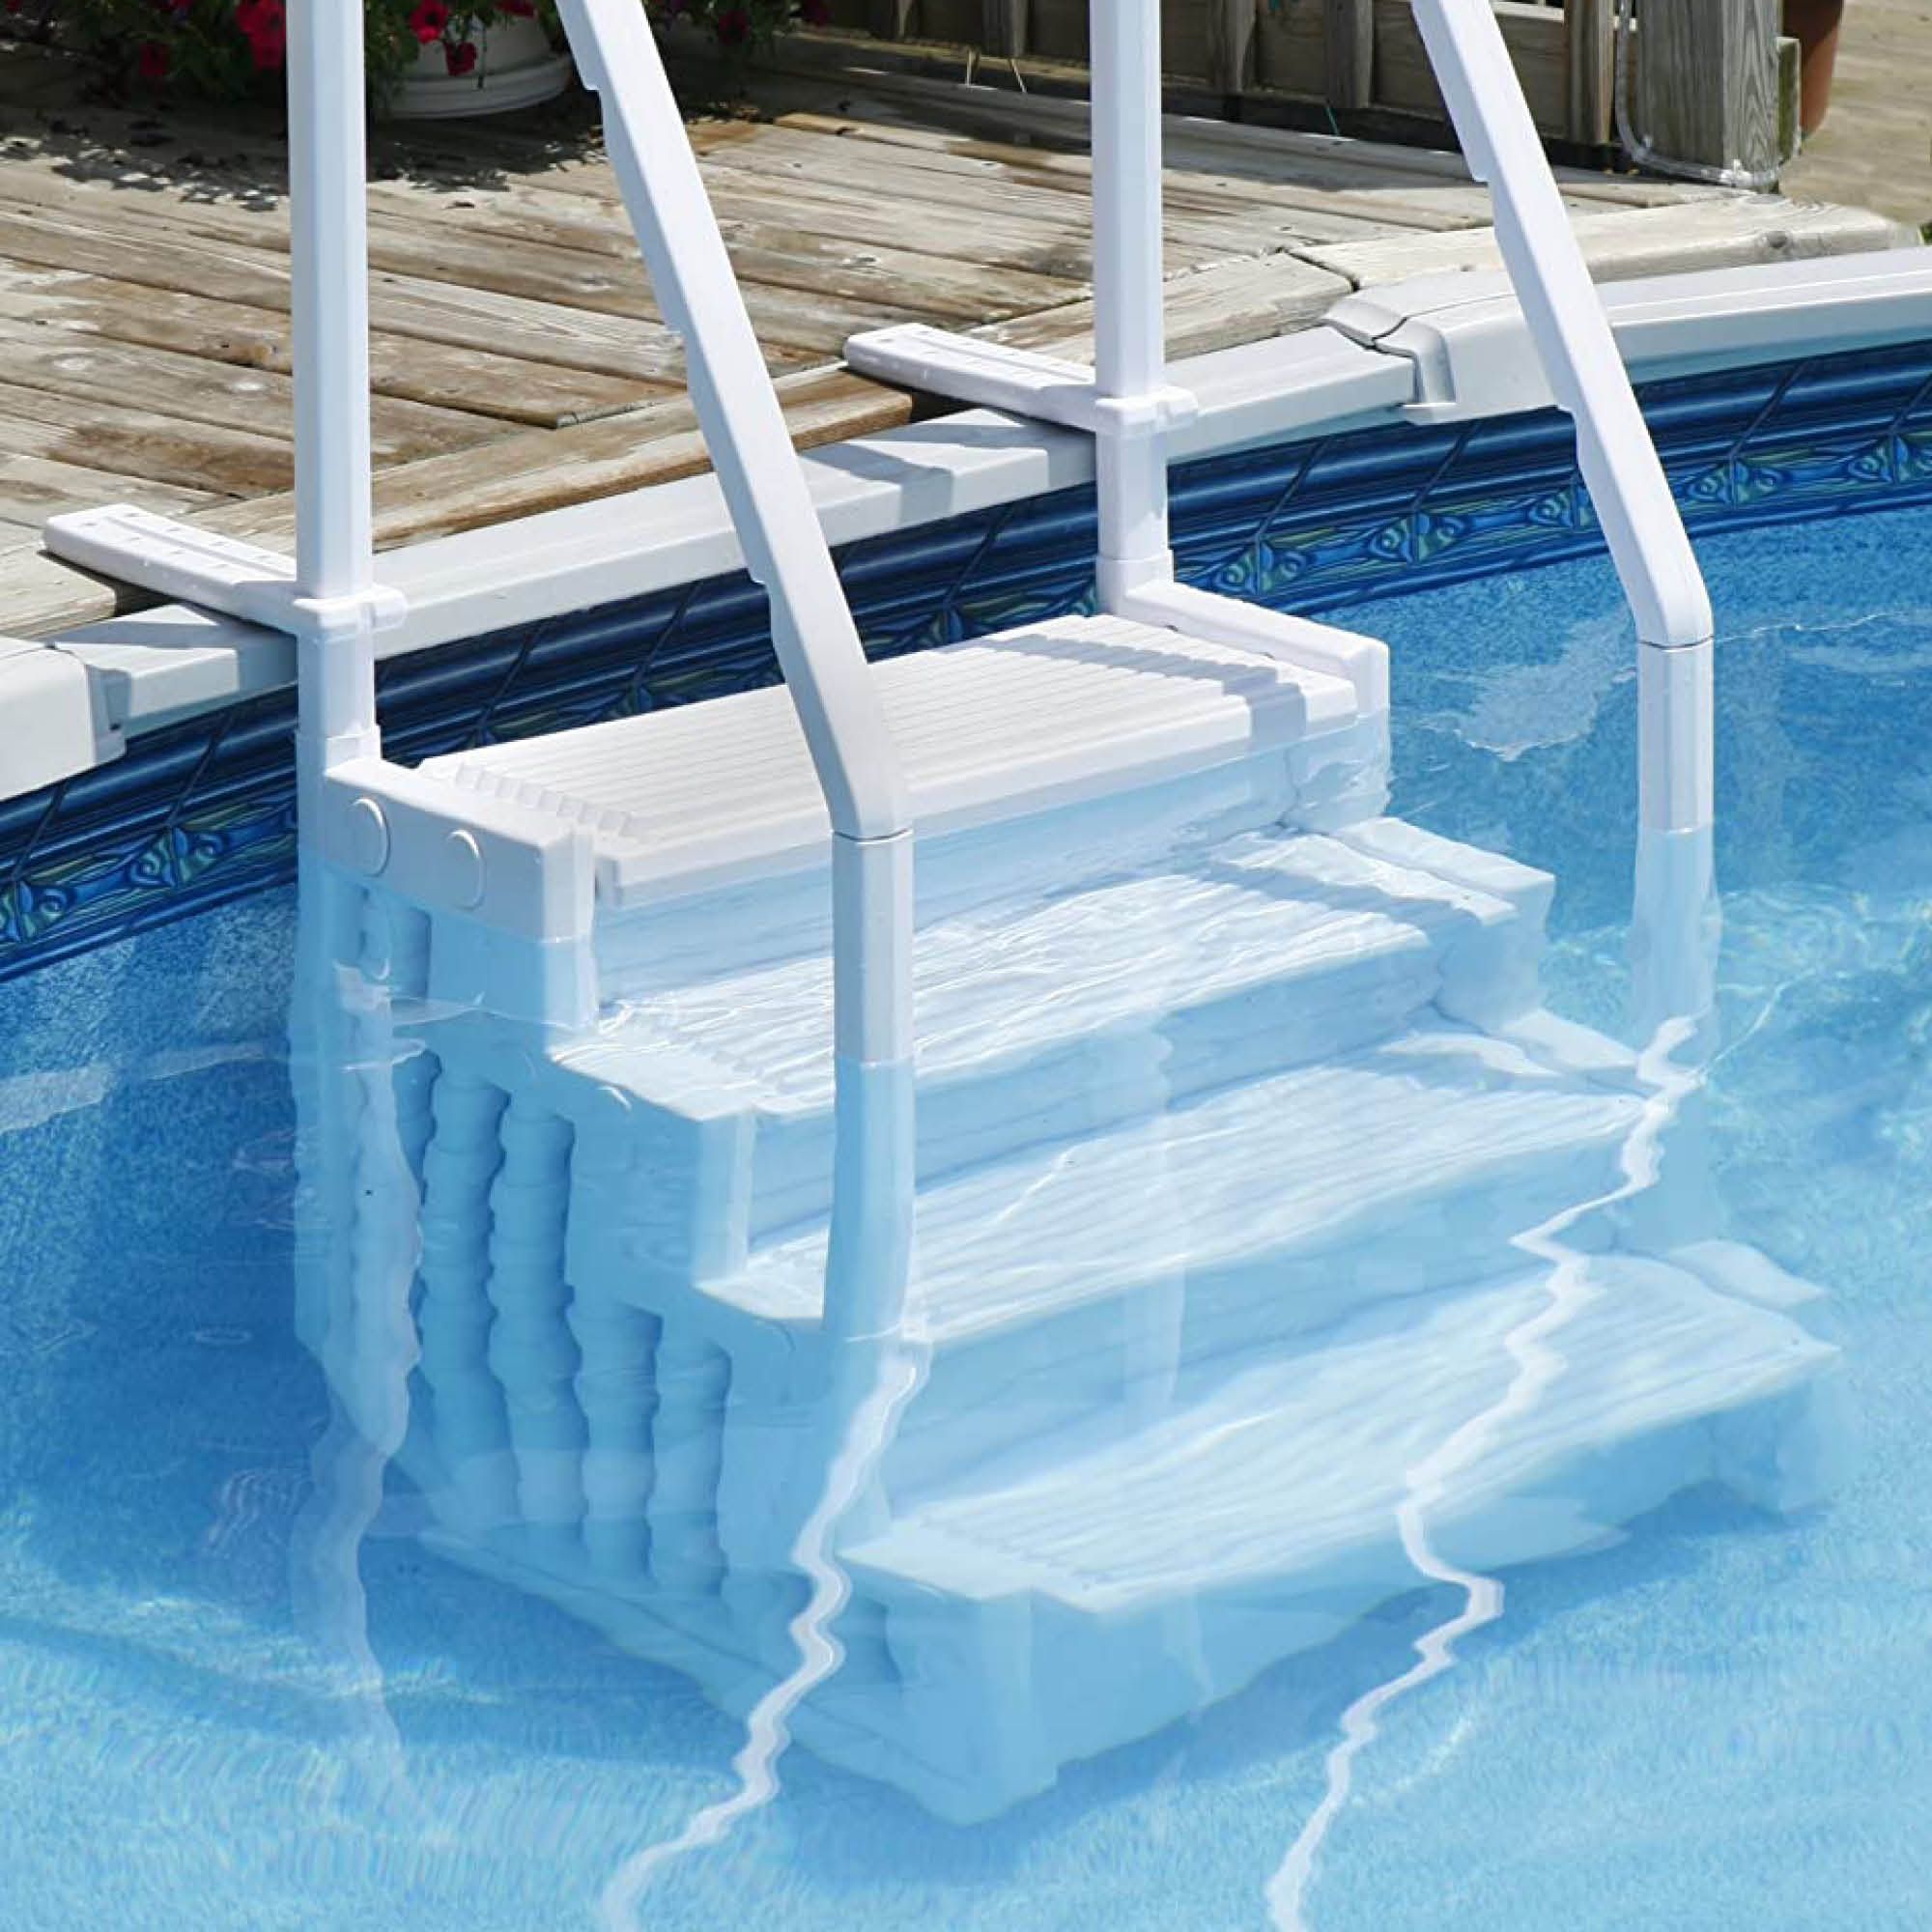 The 9 Best Pool Ladders 2021, 5 Step Stainless Steel Above Ground Pool Ladder